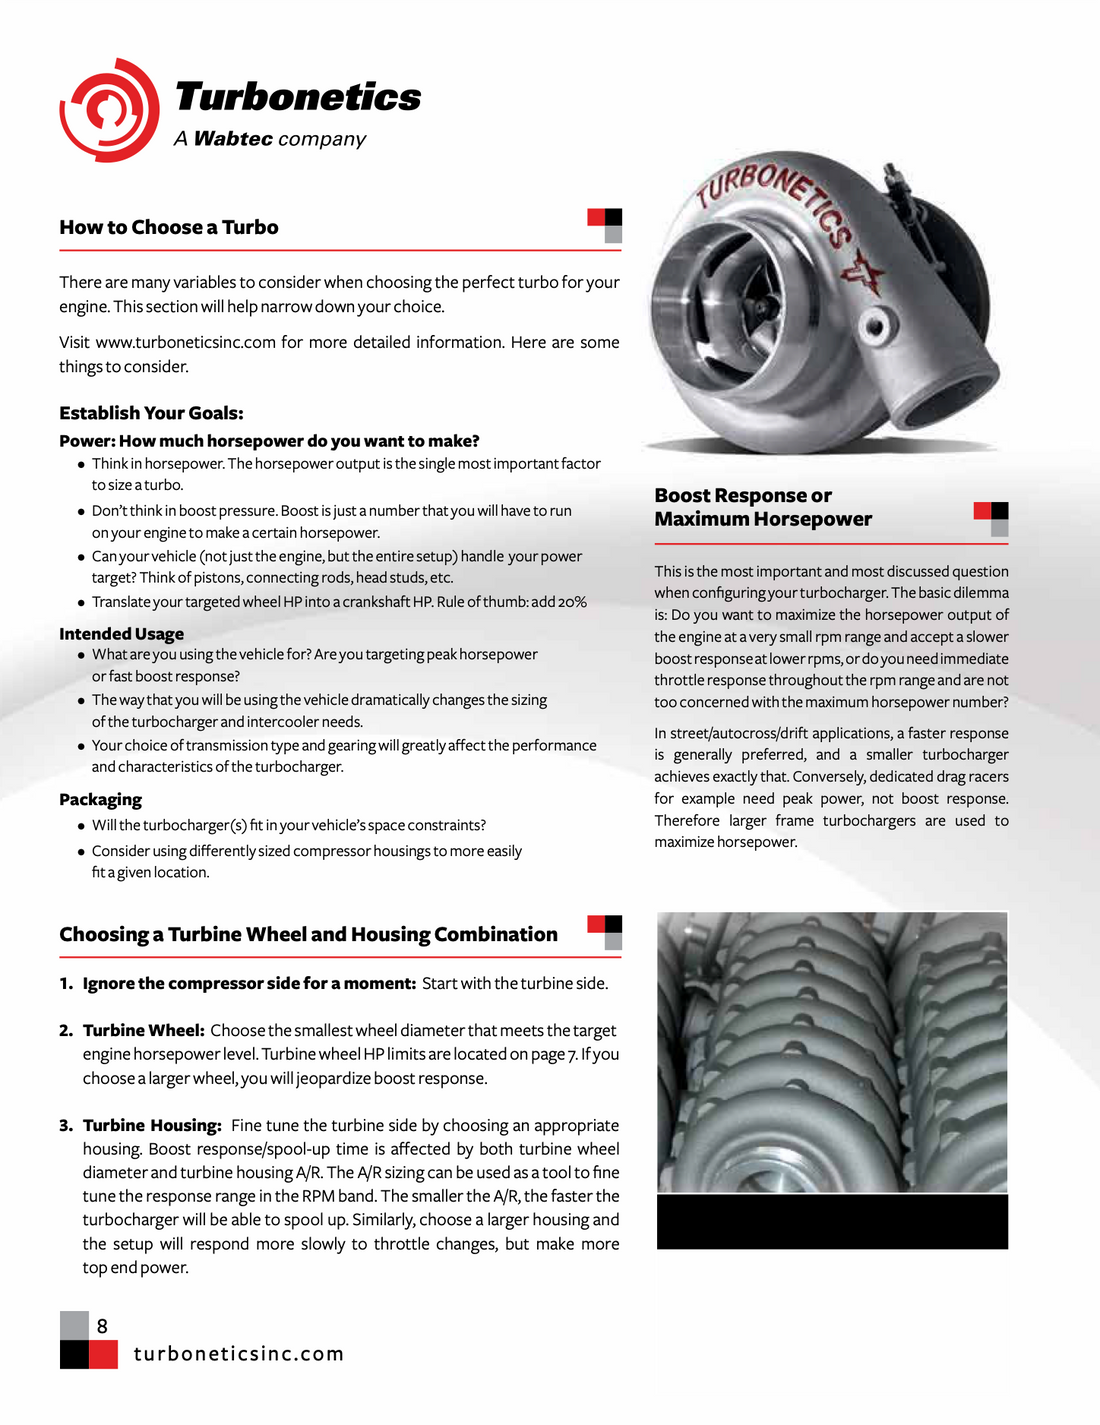 Great information on how to choose a turbo from Precision's sister company Turbonetics